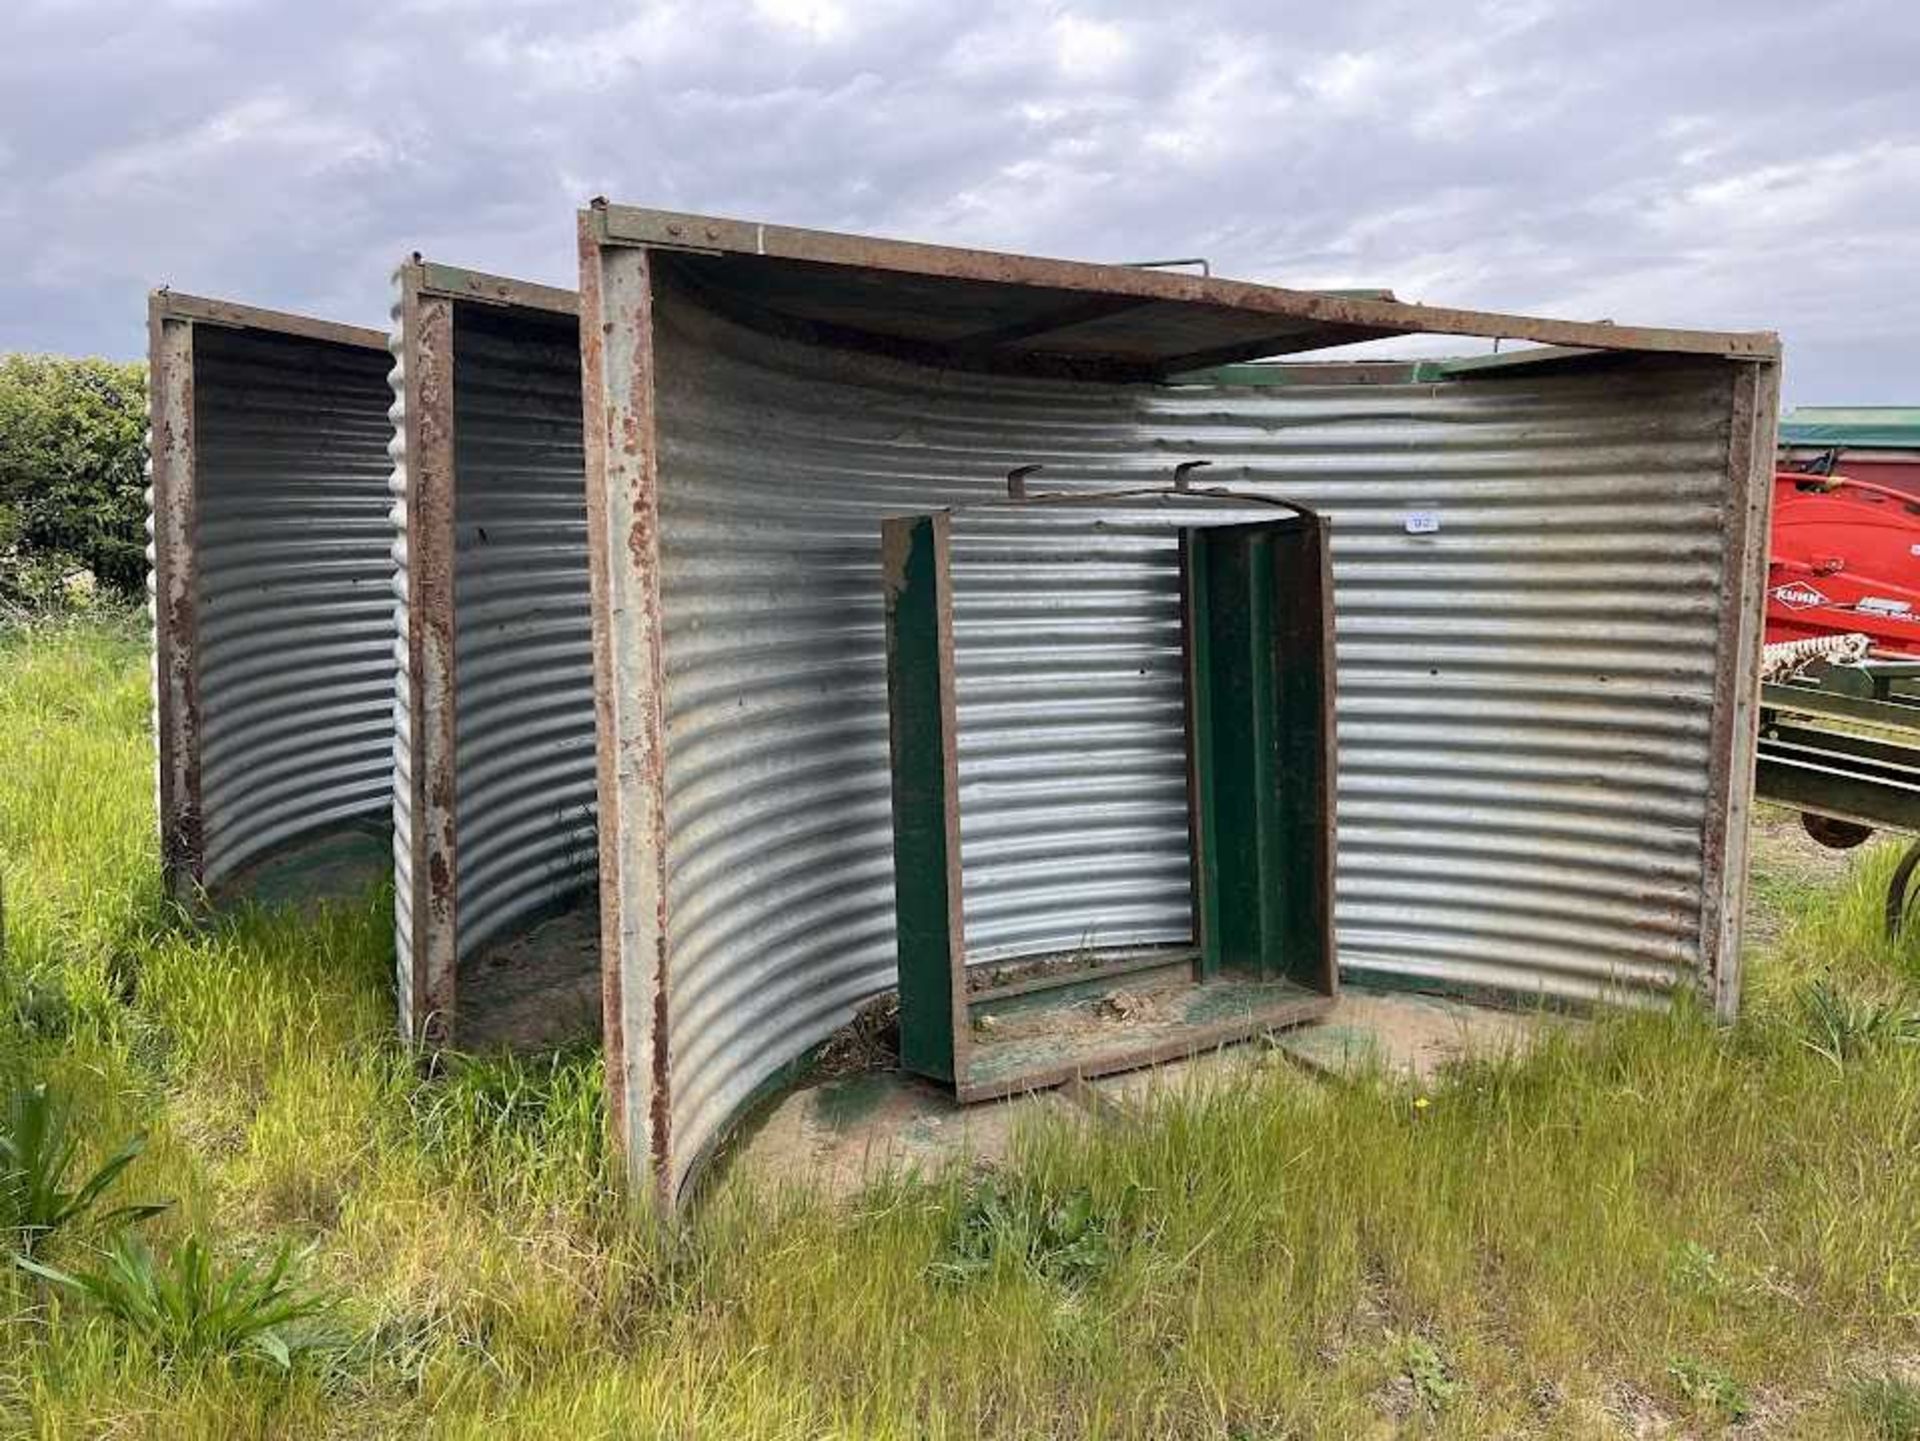 3 x John Harvey insulated farrowing huts with fenders